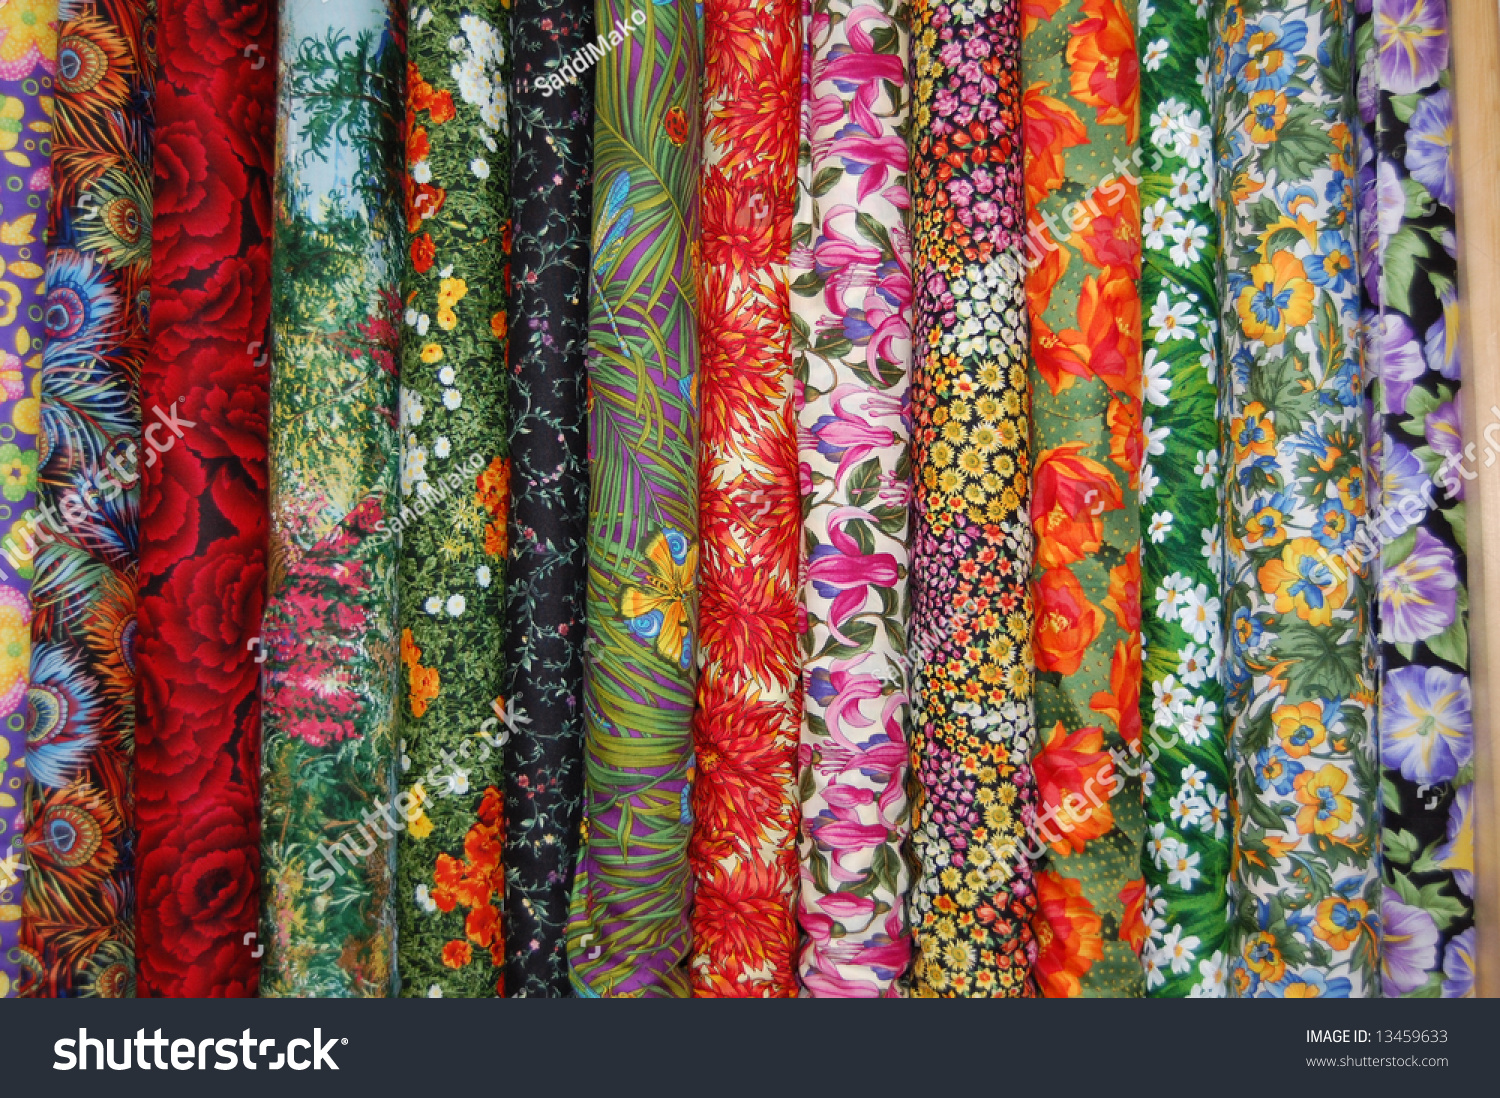 Fabric Bolts Medium Scale Floral Prints Stock Photo 13459633 - Shutterstock